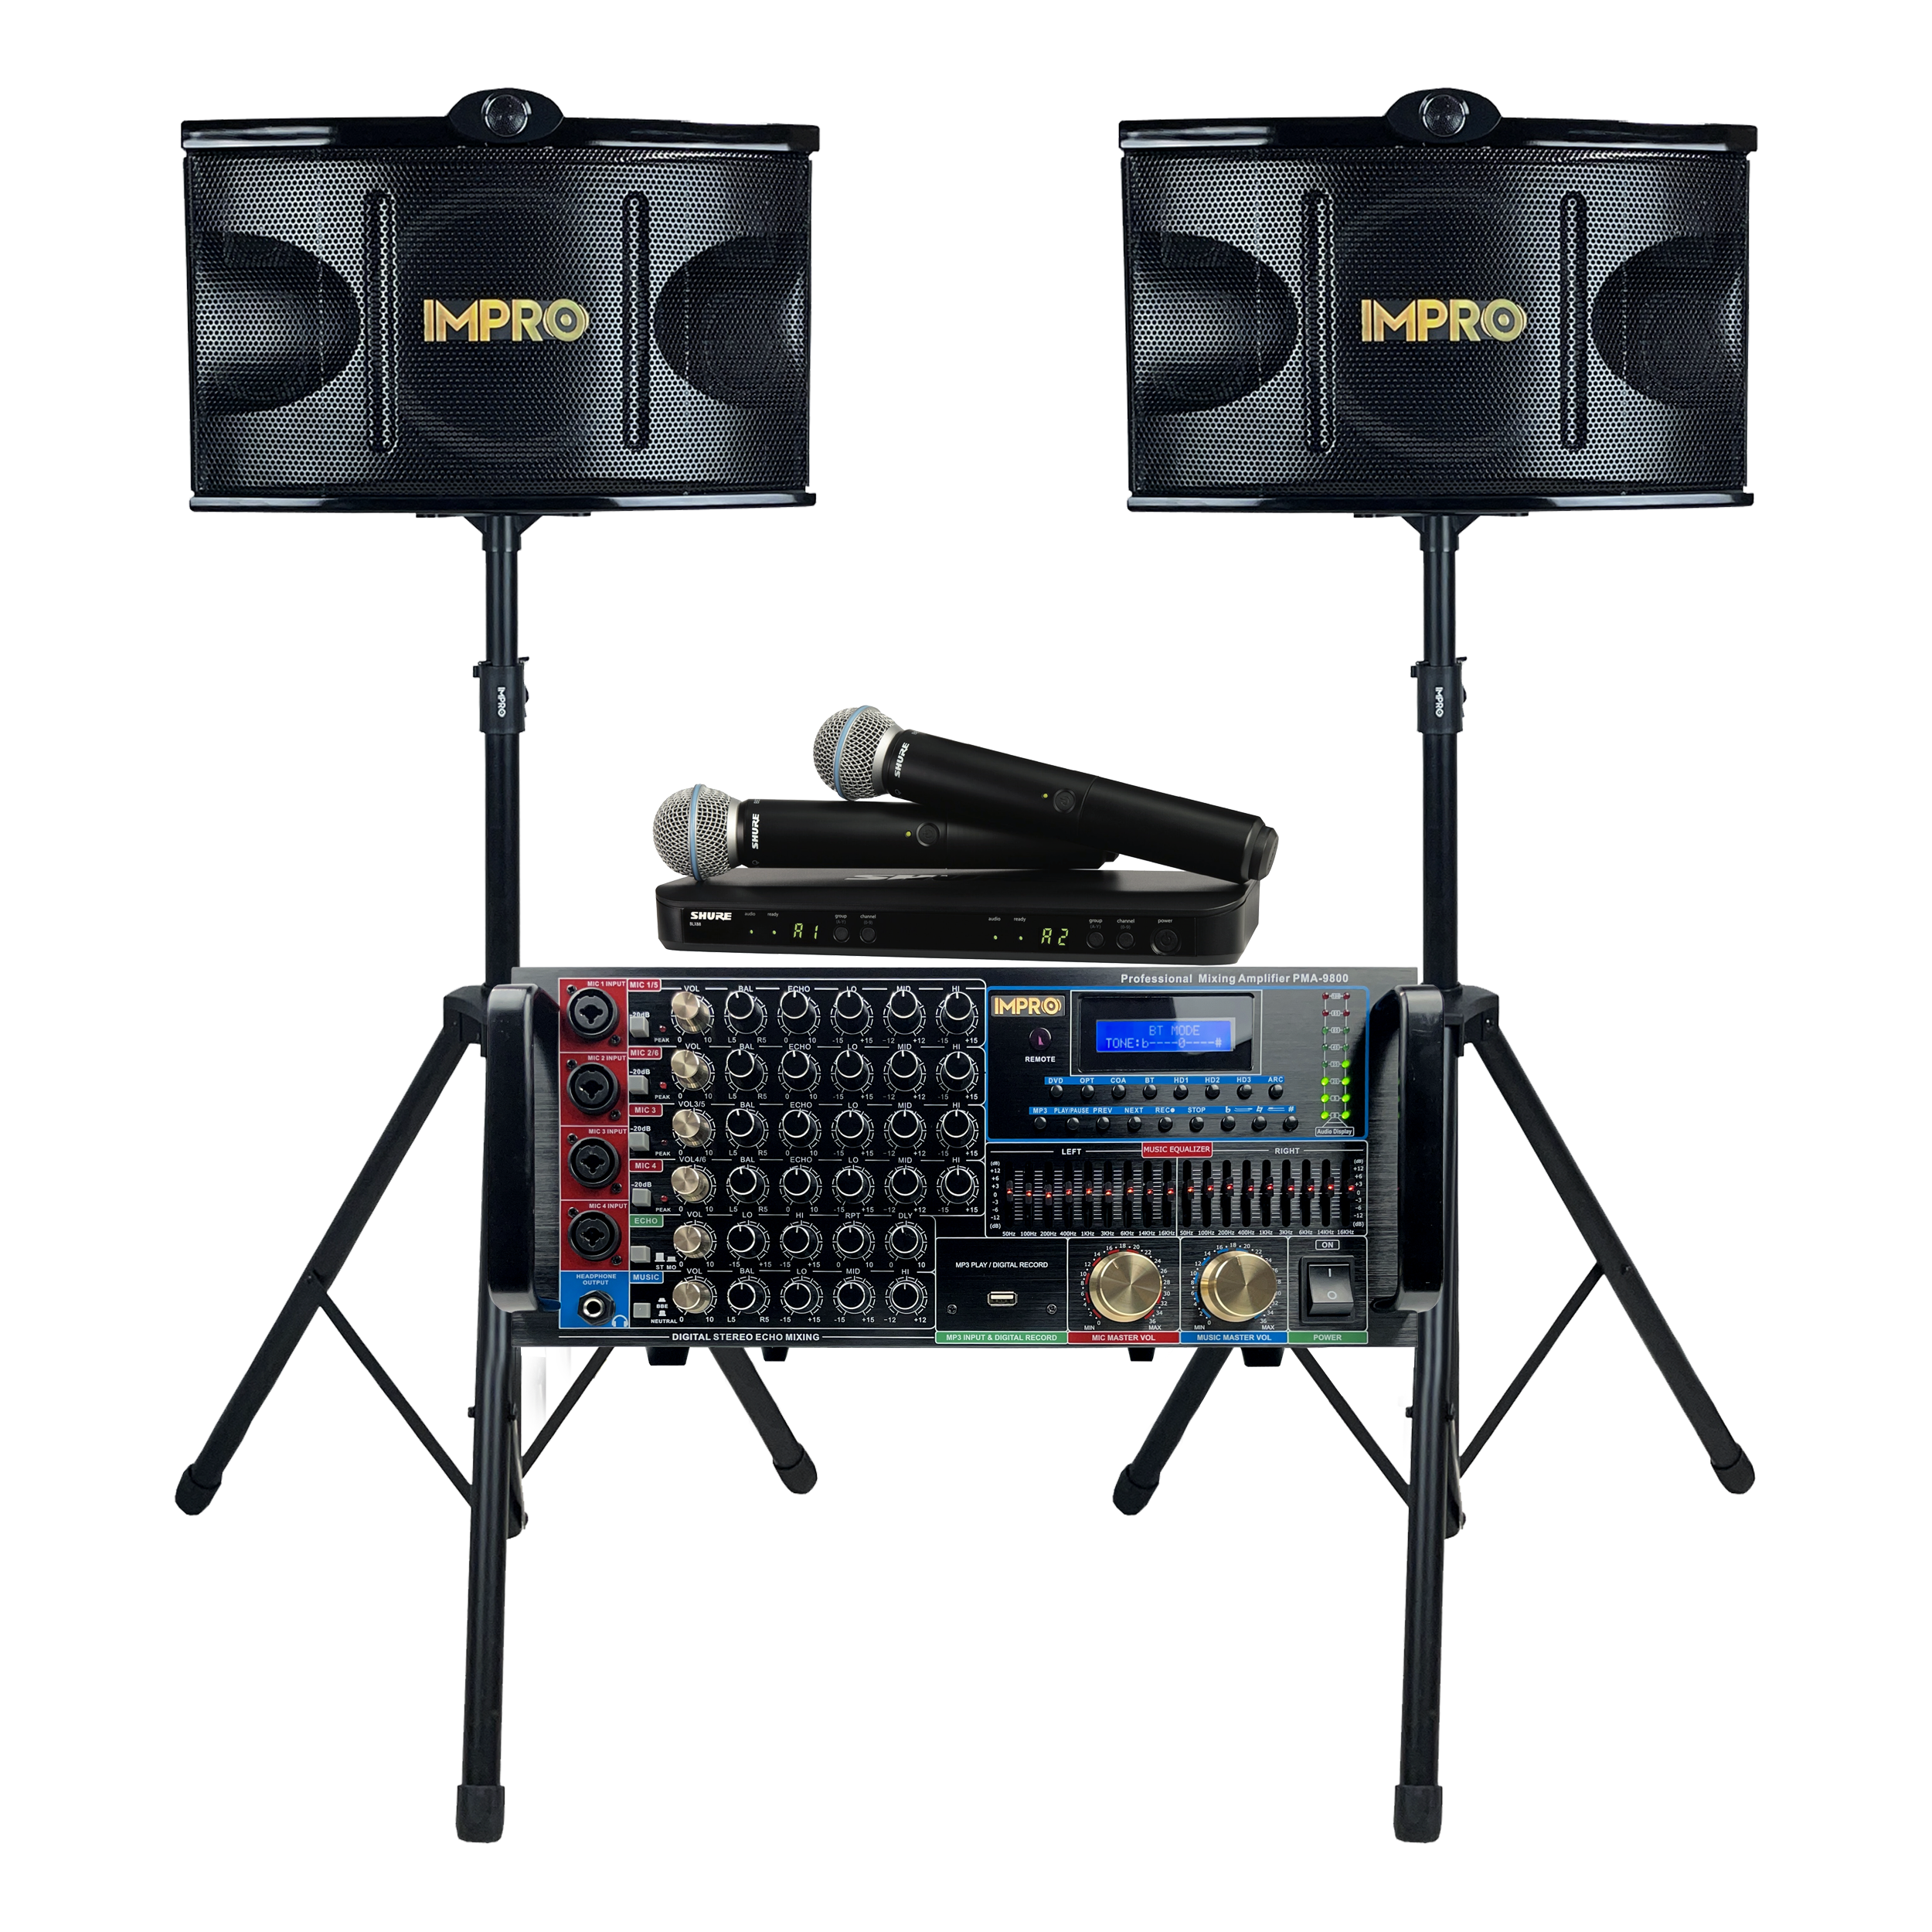 Ultra Elite Bundle with Mixing Amplifier, Speakers, SHURE BLX288 Microphones, and Accessories (4 items)